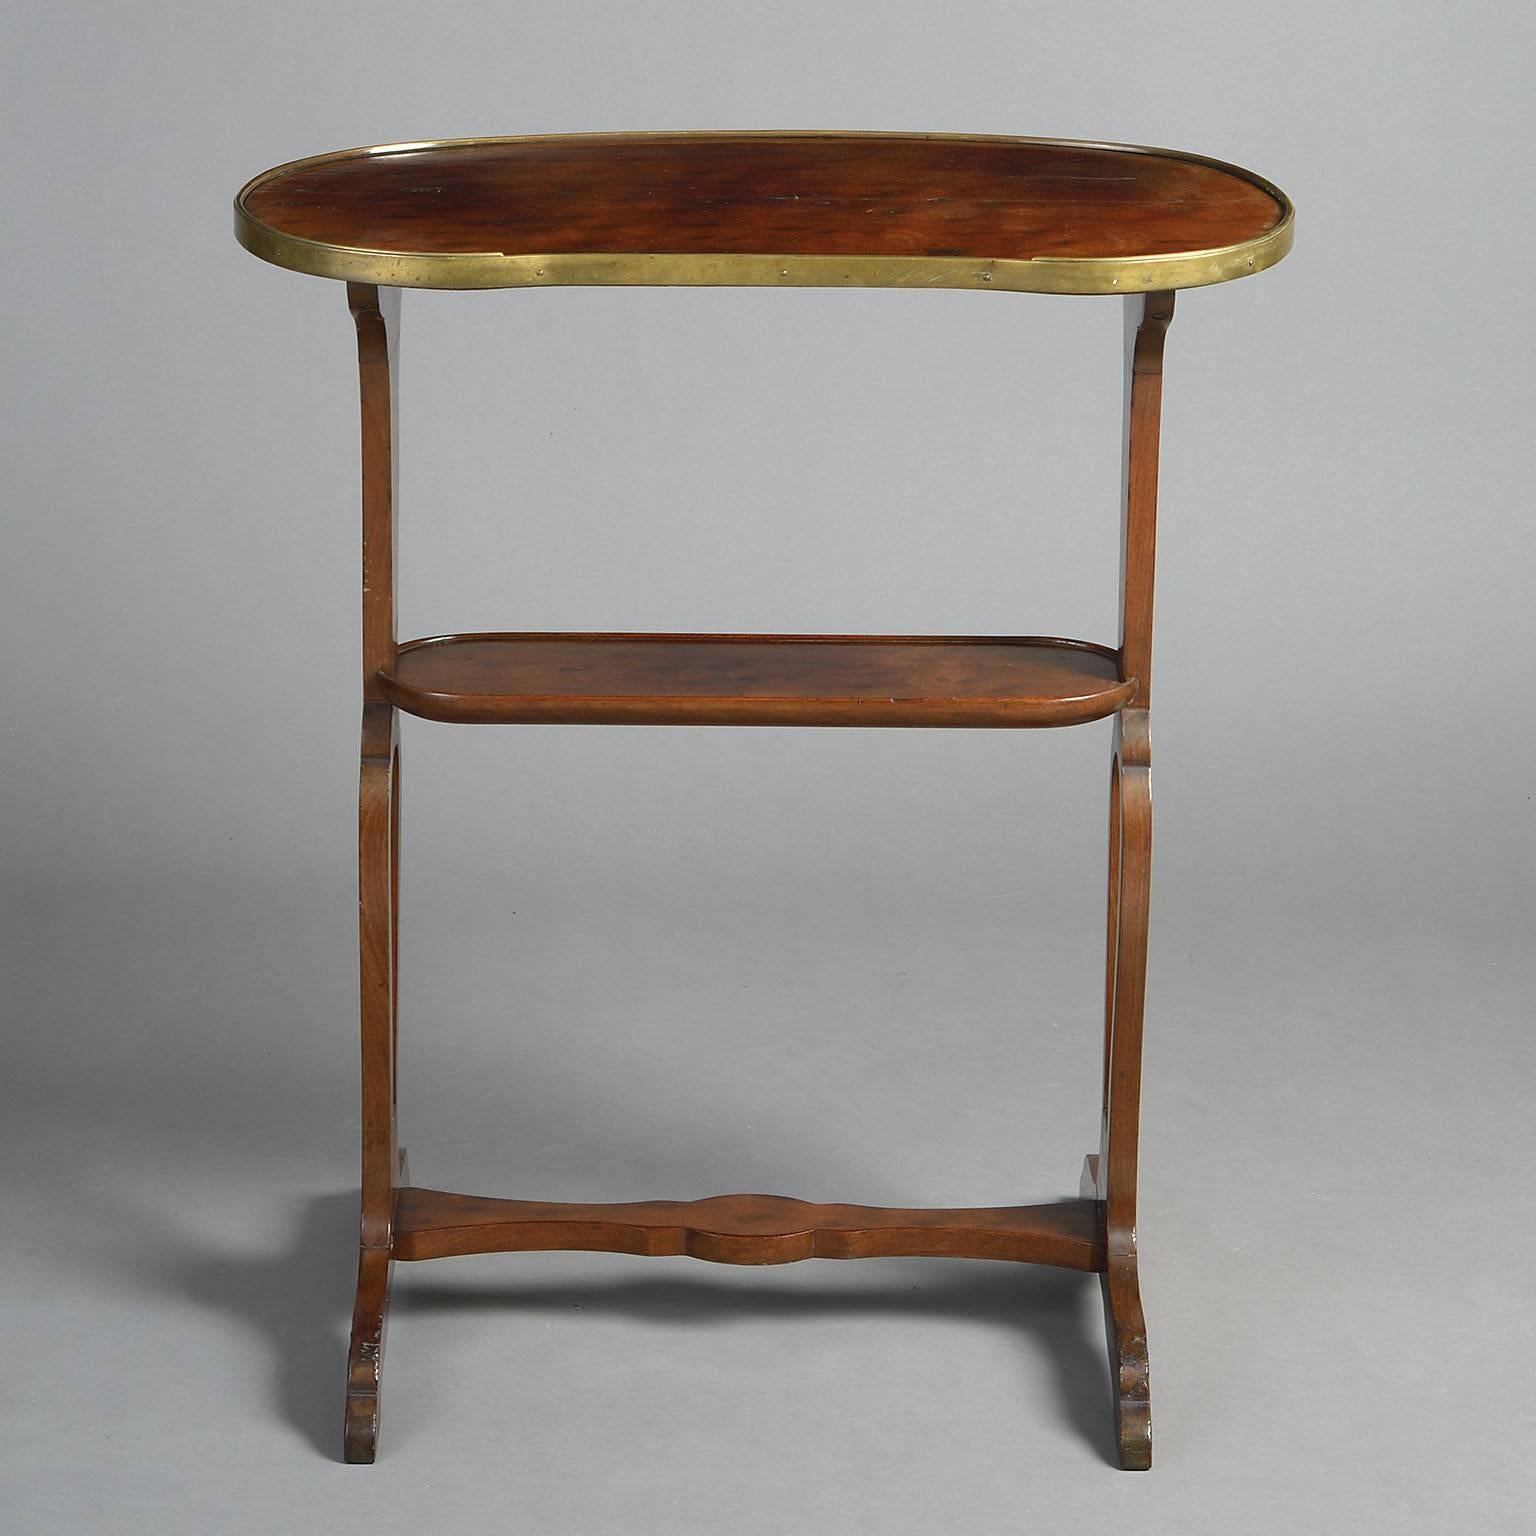 The kidney-shaped top of highly figured “plum pudding” mahogany with brass edging raised on pierced trestle supports with lower tier. 

Stamped Escalier De Cristal PARIS.
 